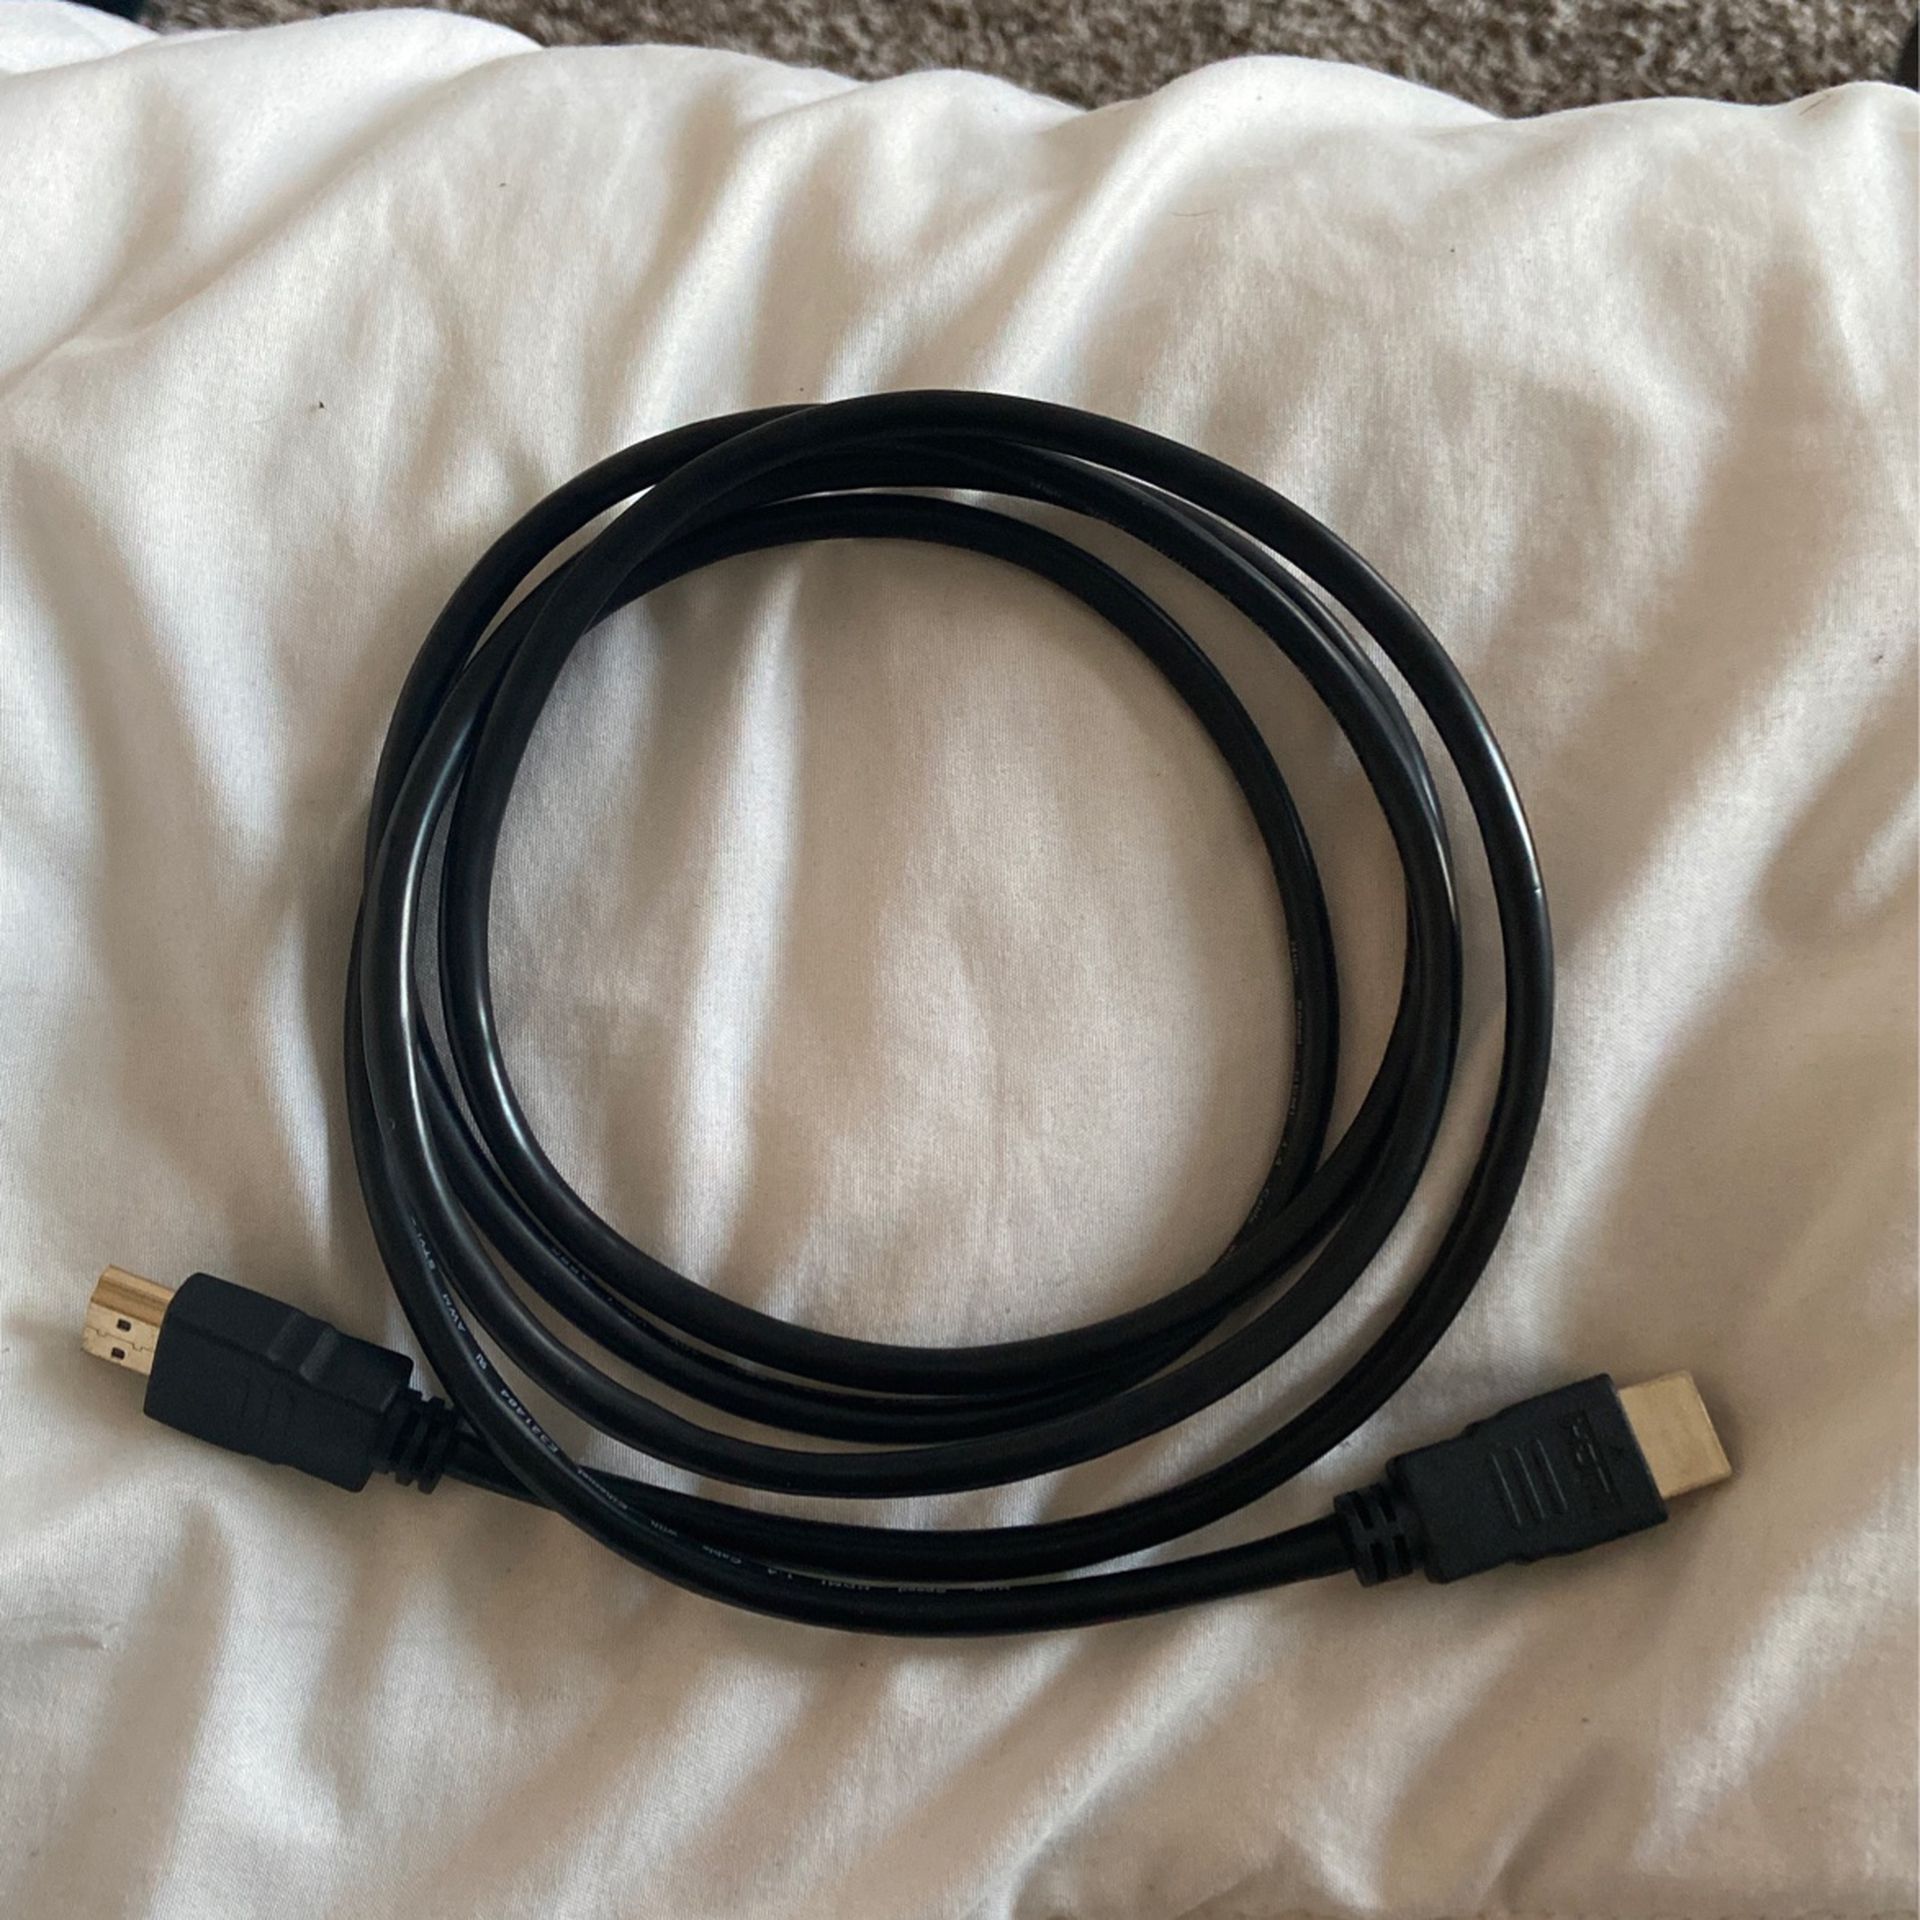 3 Foot HDMI cable